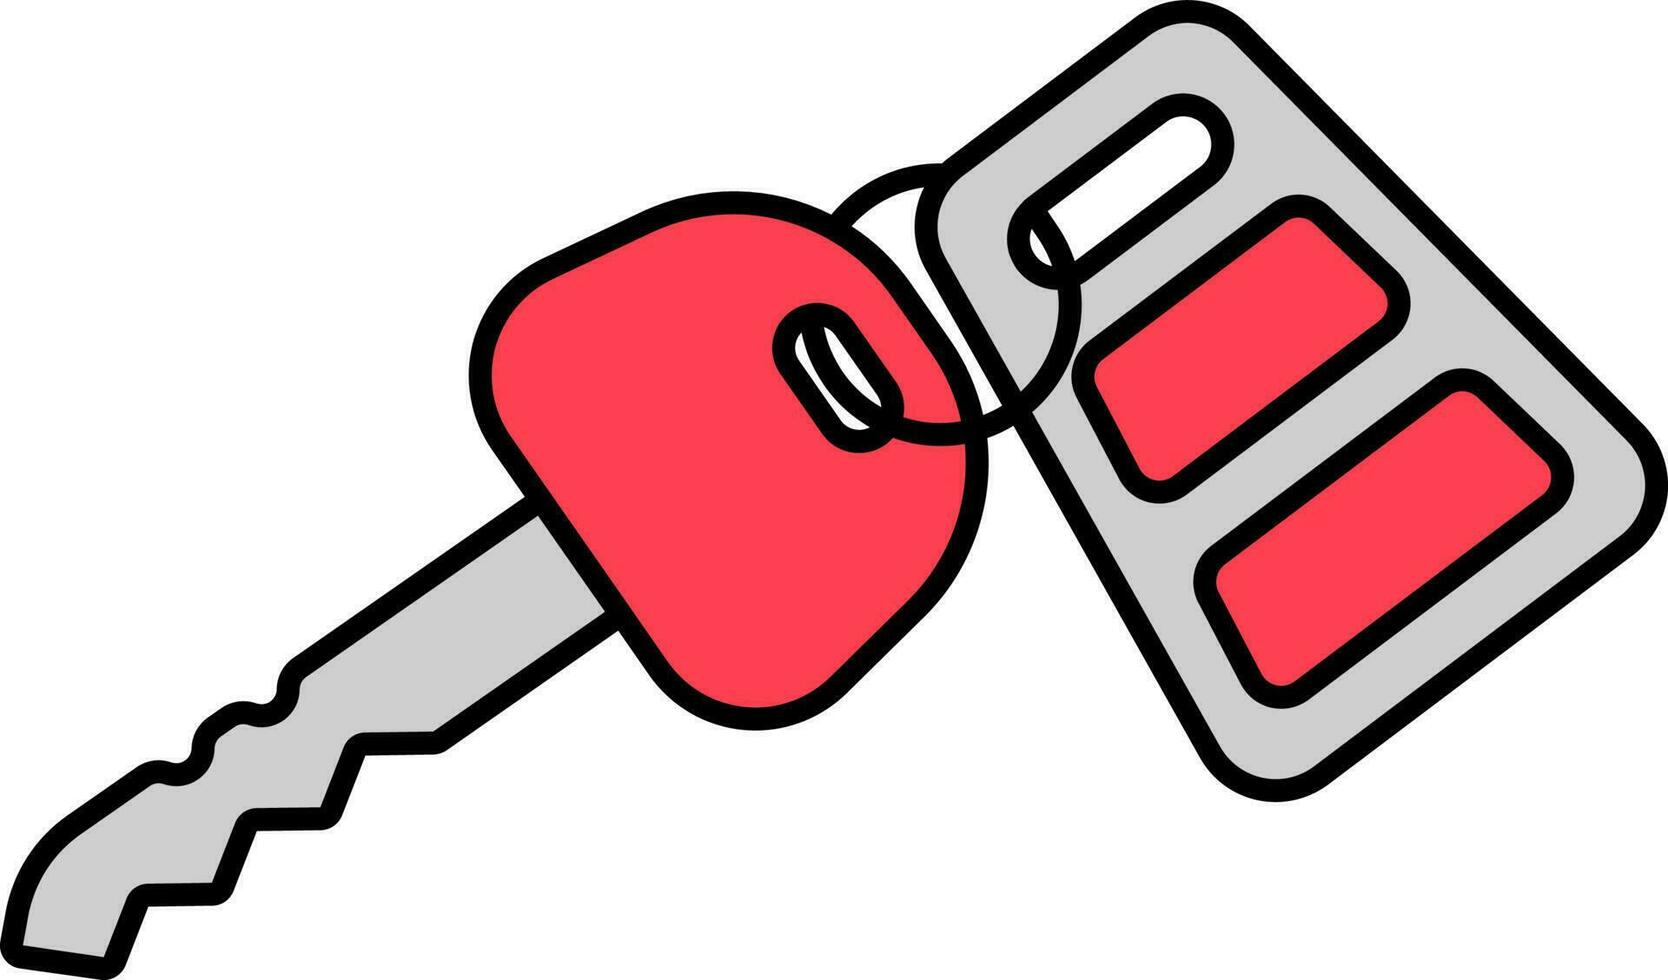 Key with Keychain Icon In Red And Grey Color. vector